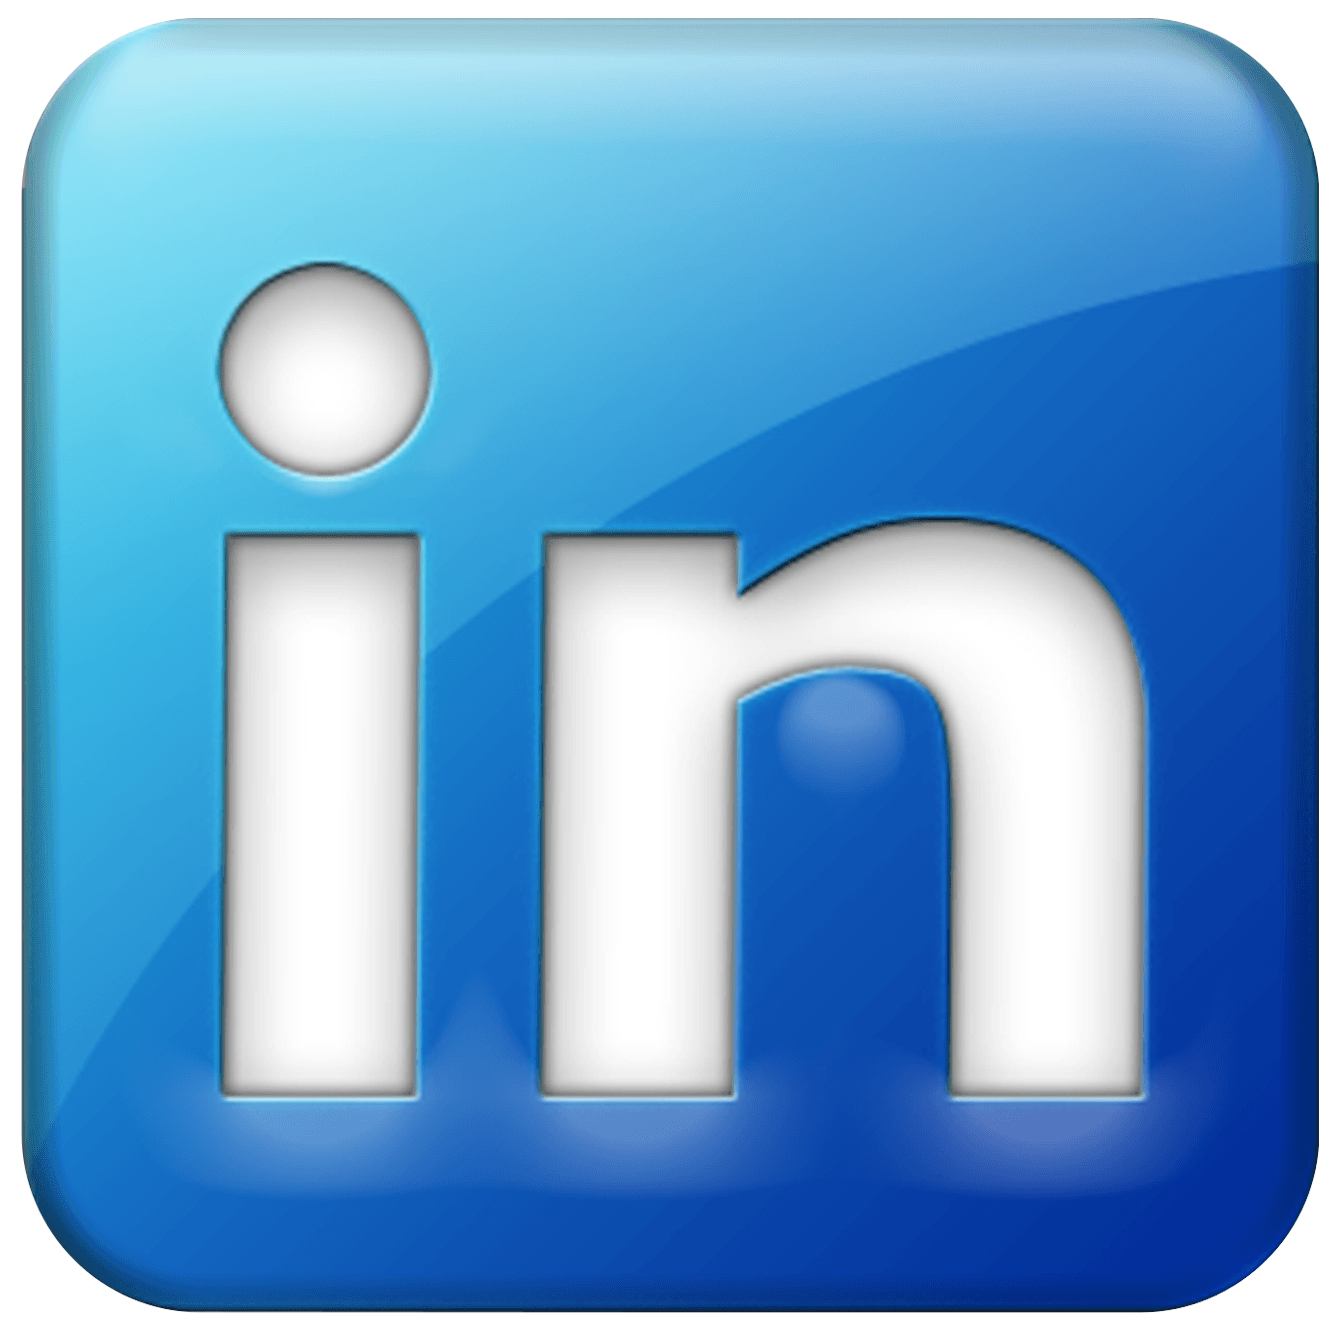 Official LinkedIn Logo - Linkedin Logo Transparent PNG Pictures - Free Icons and PNG Backgrounds